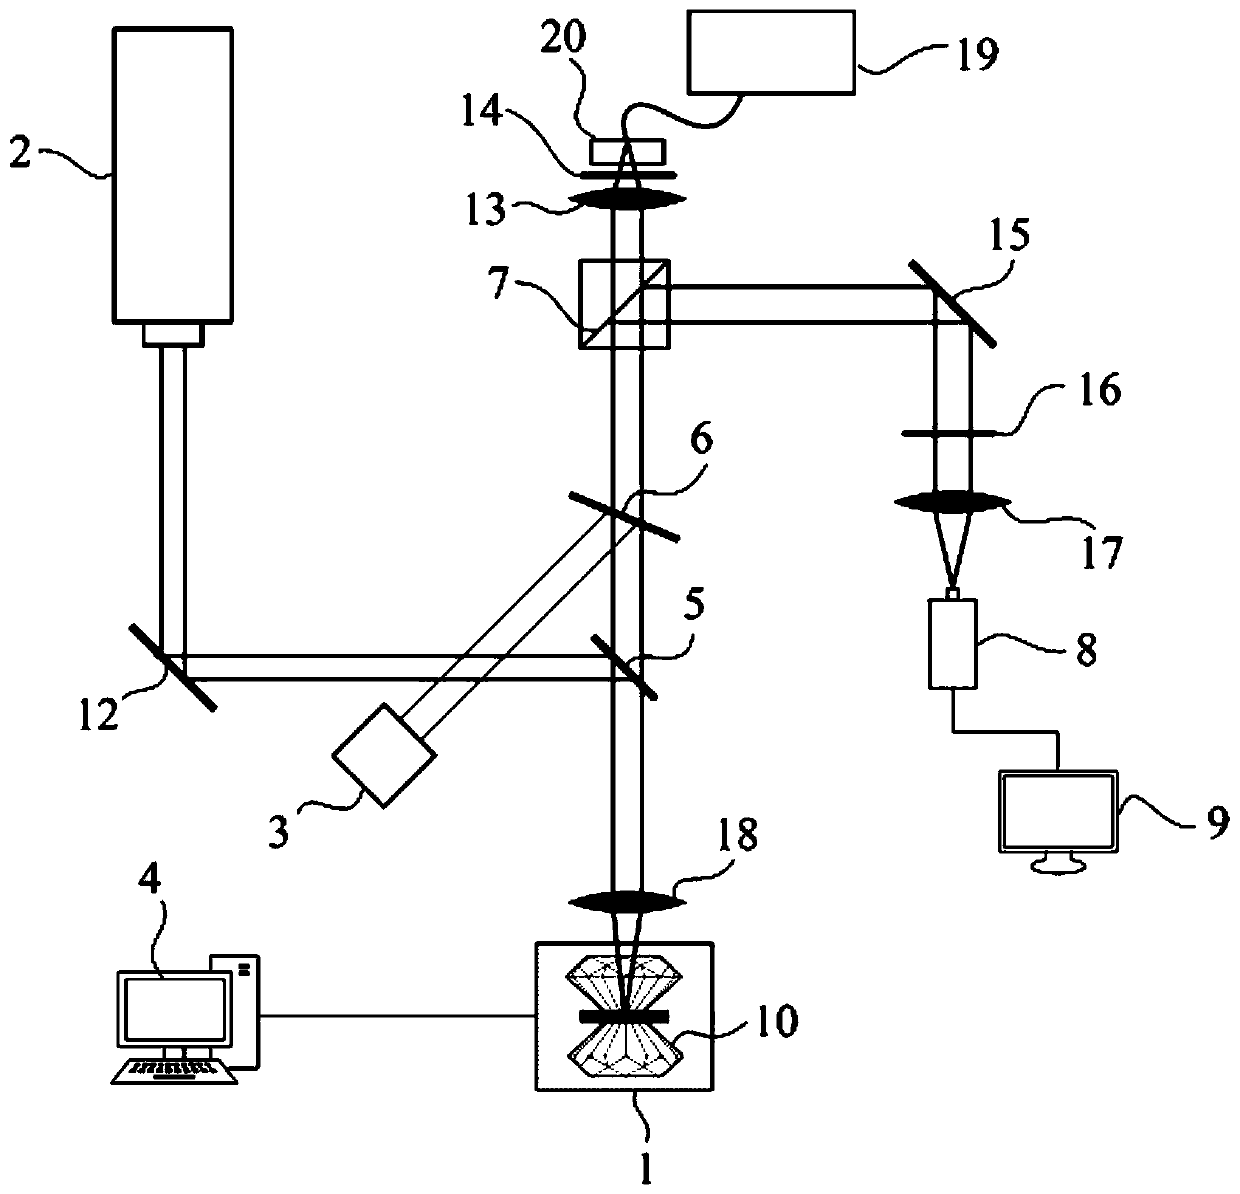 Optical system pre-positioning method